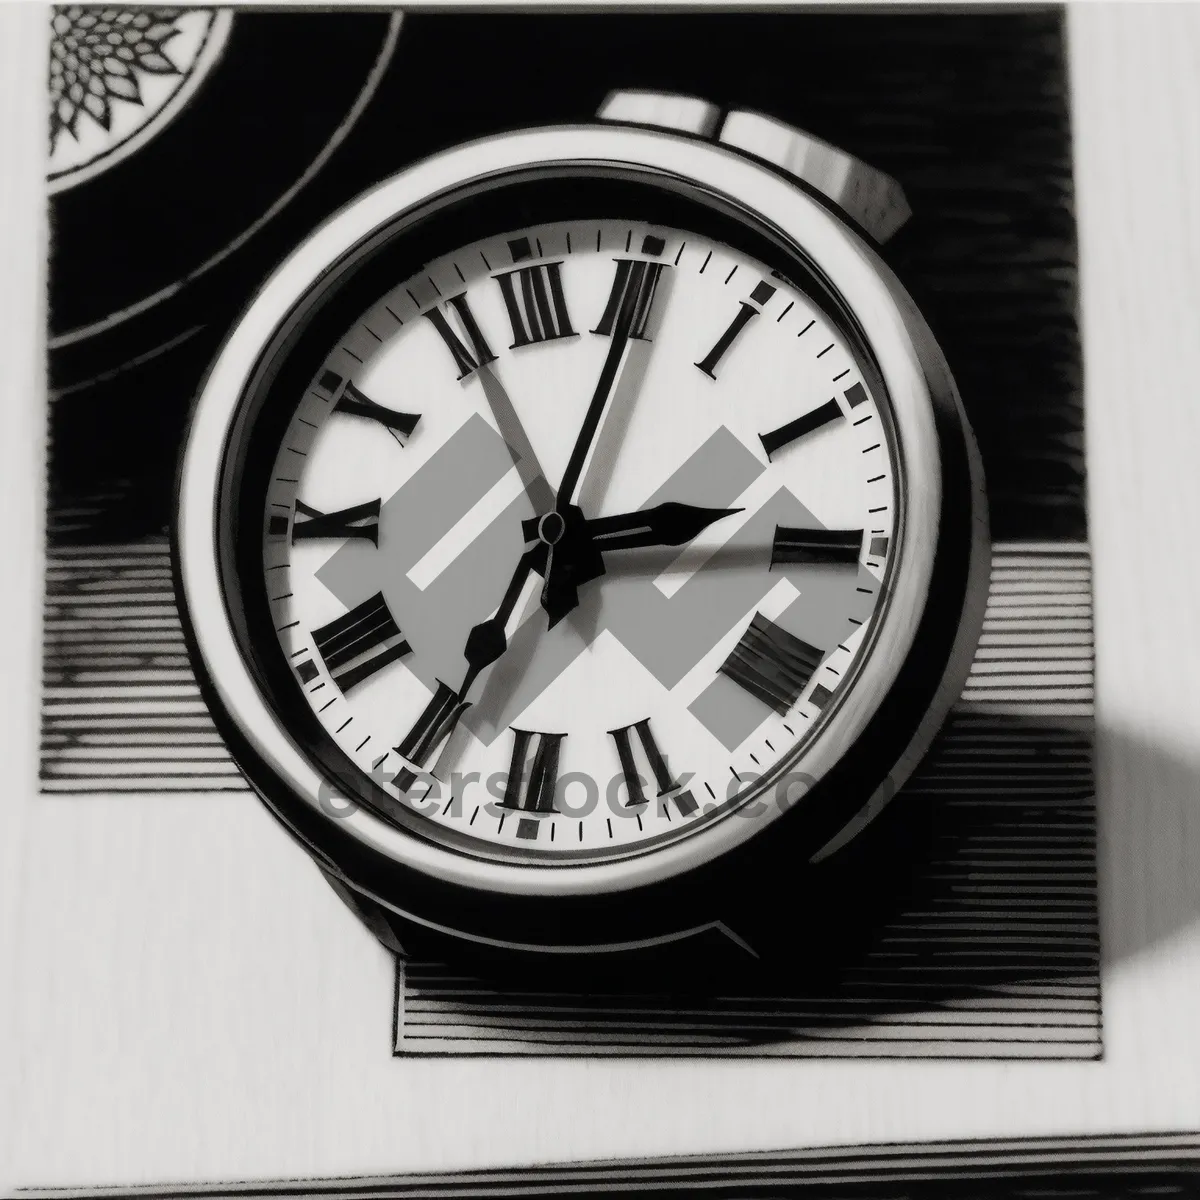 Picture of Classic Timepiece on Wall Clock